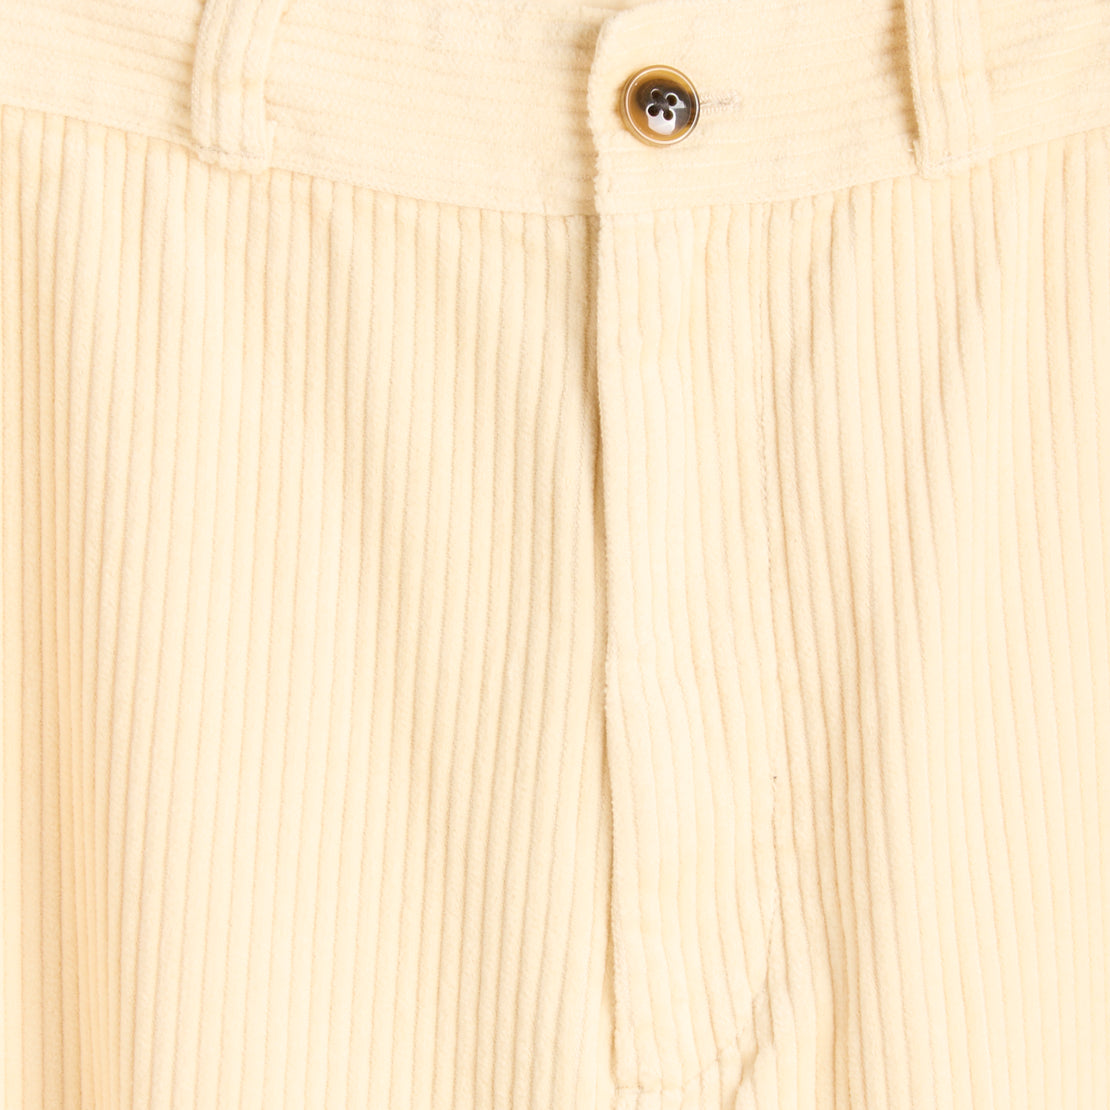 5 Wale Cropped Corduroy Pant - Ivory - BEAMS BOY - STAG Provisions - W - Pants - Twill